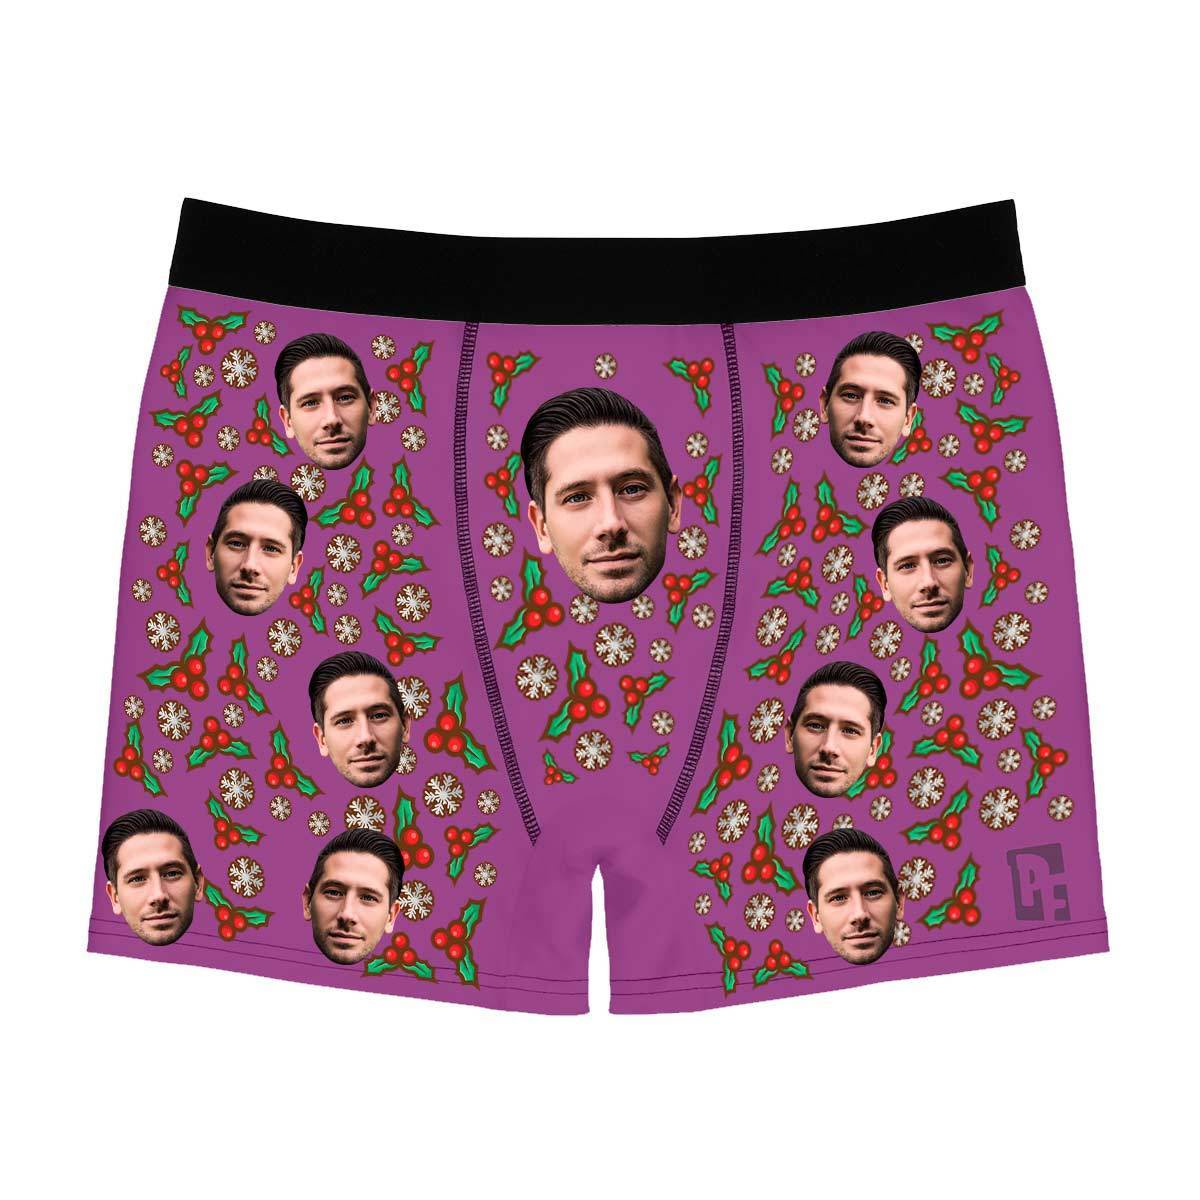 Purple Mistletoe men's boxer briefs personalized with photo printed on them